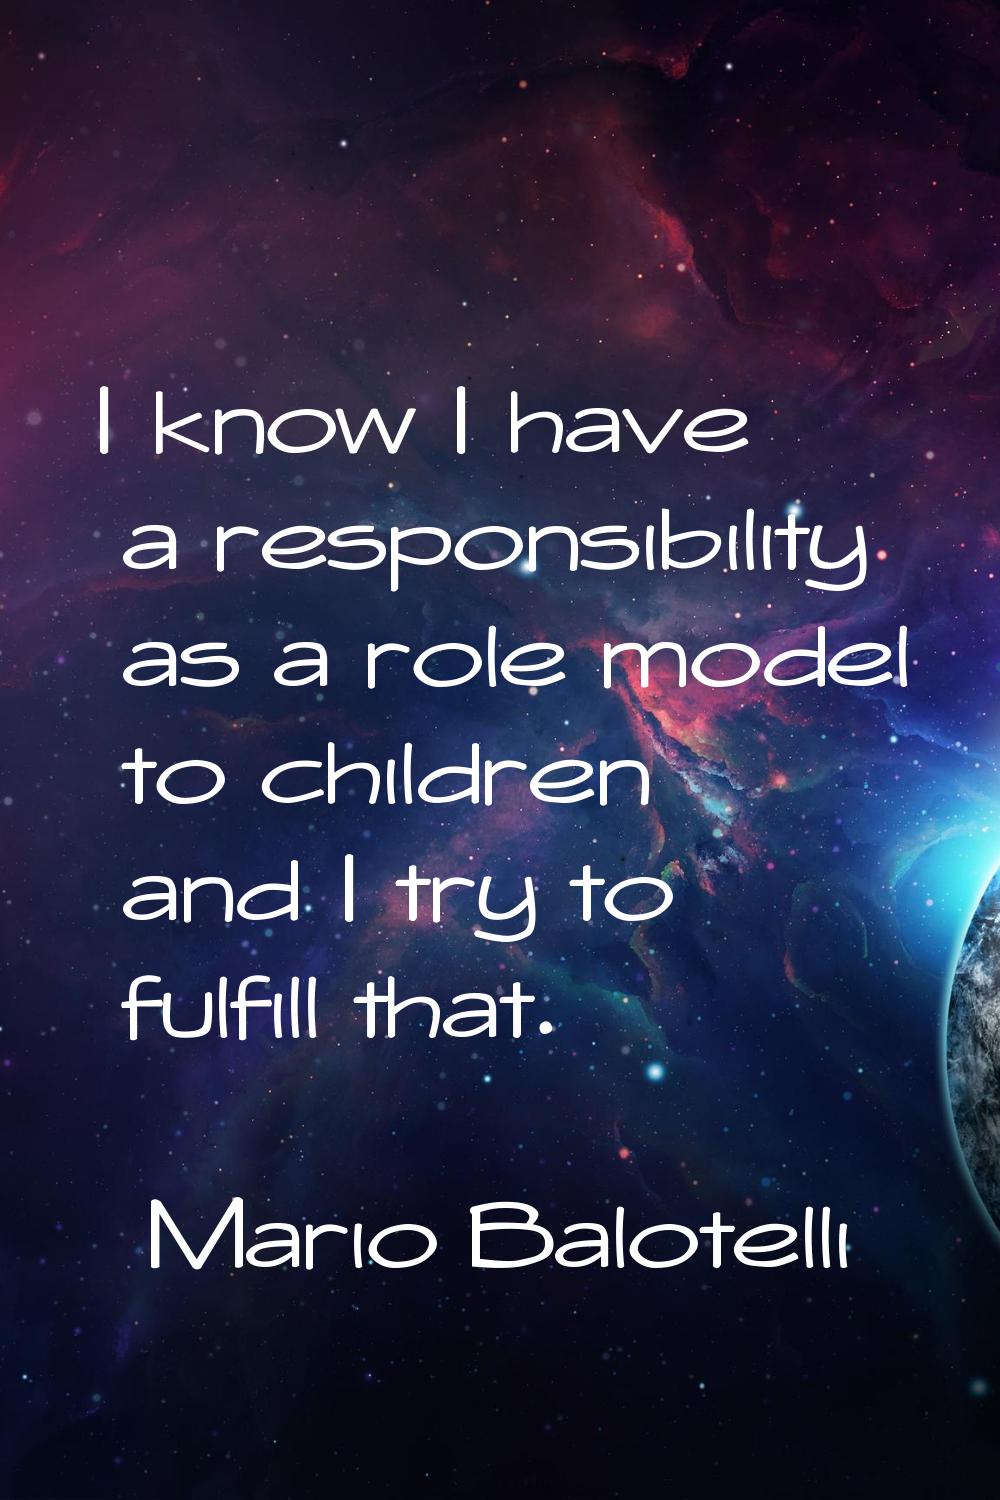 I know I have a responsibility as a role model to children and I try to fulfill that.